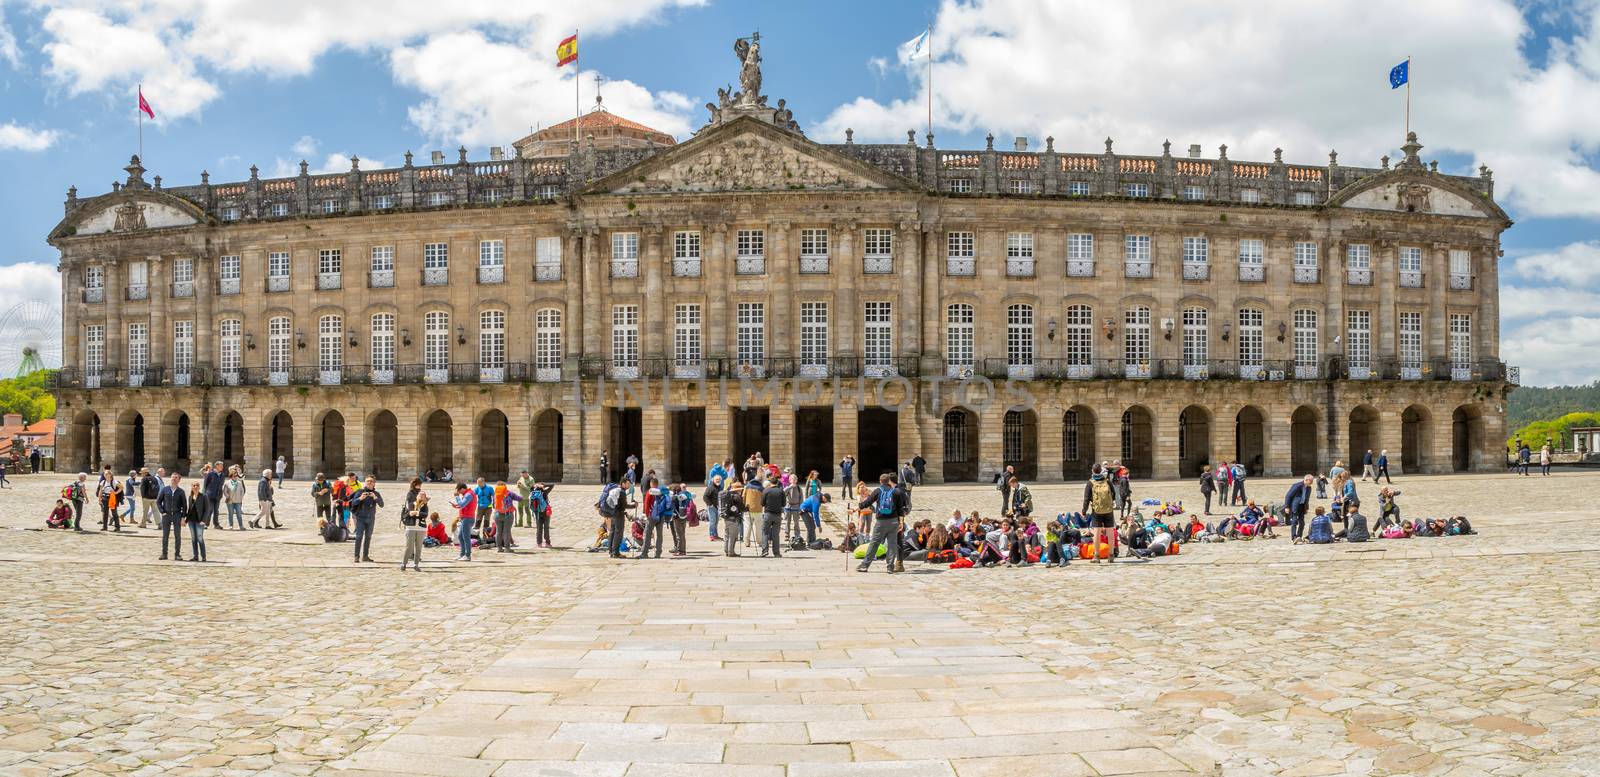 Santiago de Compostela, Spain, May 2018: Pazo de Raxoi is a neoclassical palace located on the Praza do Obradoiro in front of the cathedral